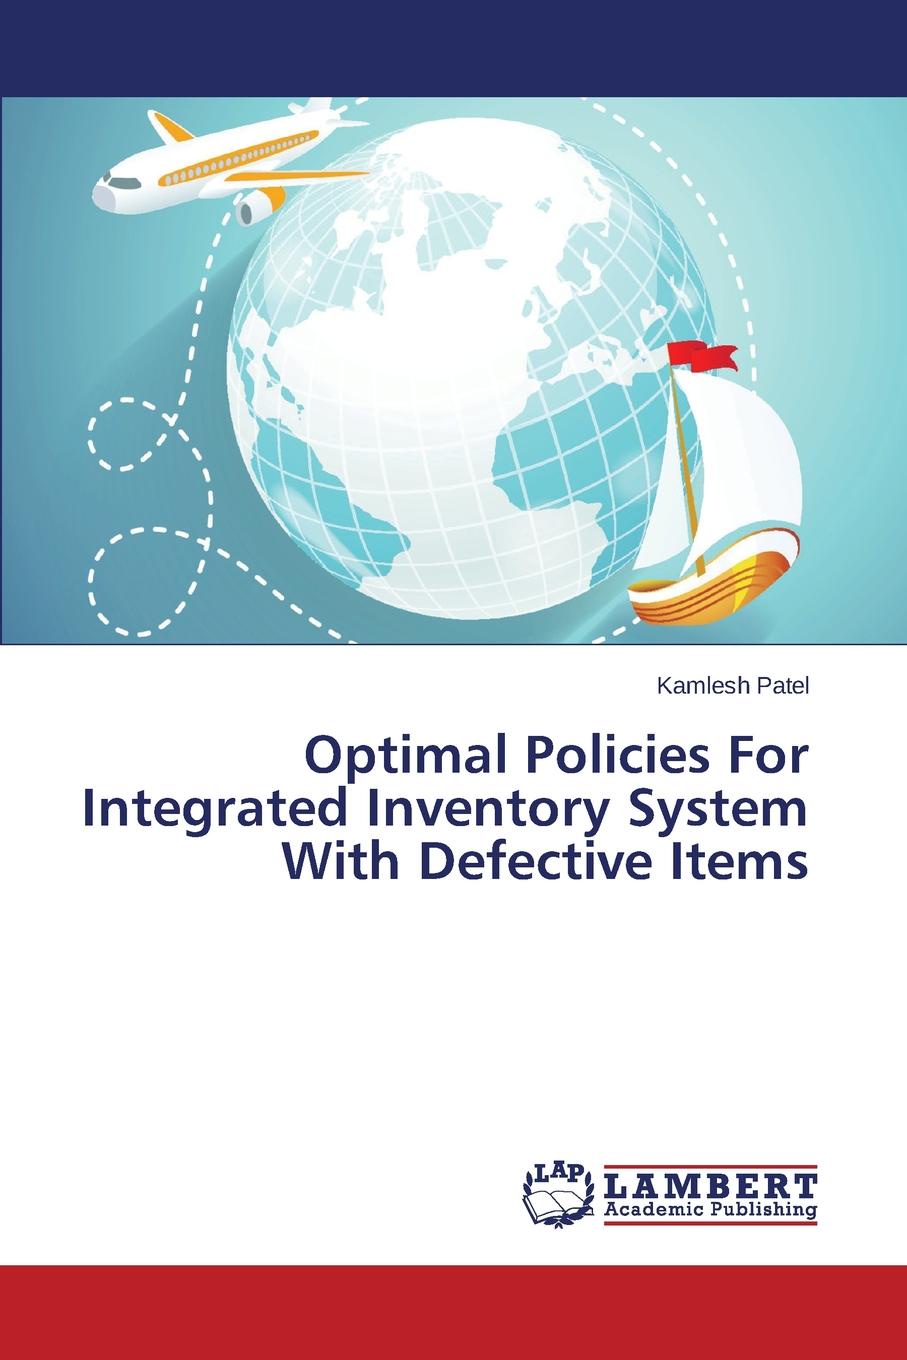 Optimal Policies For Integrated Inventory System With Defective Items